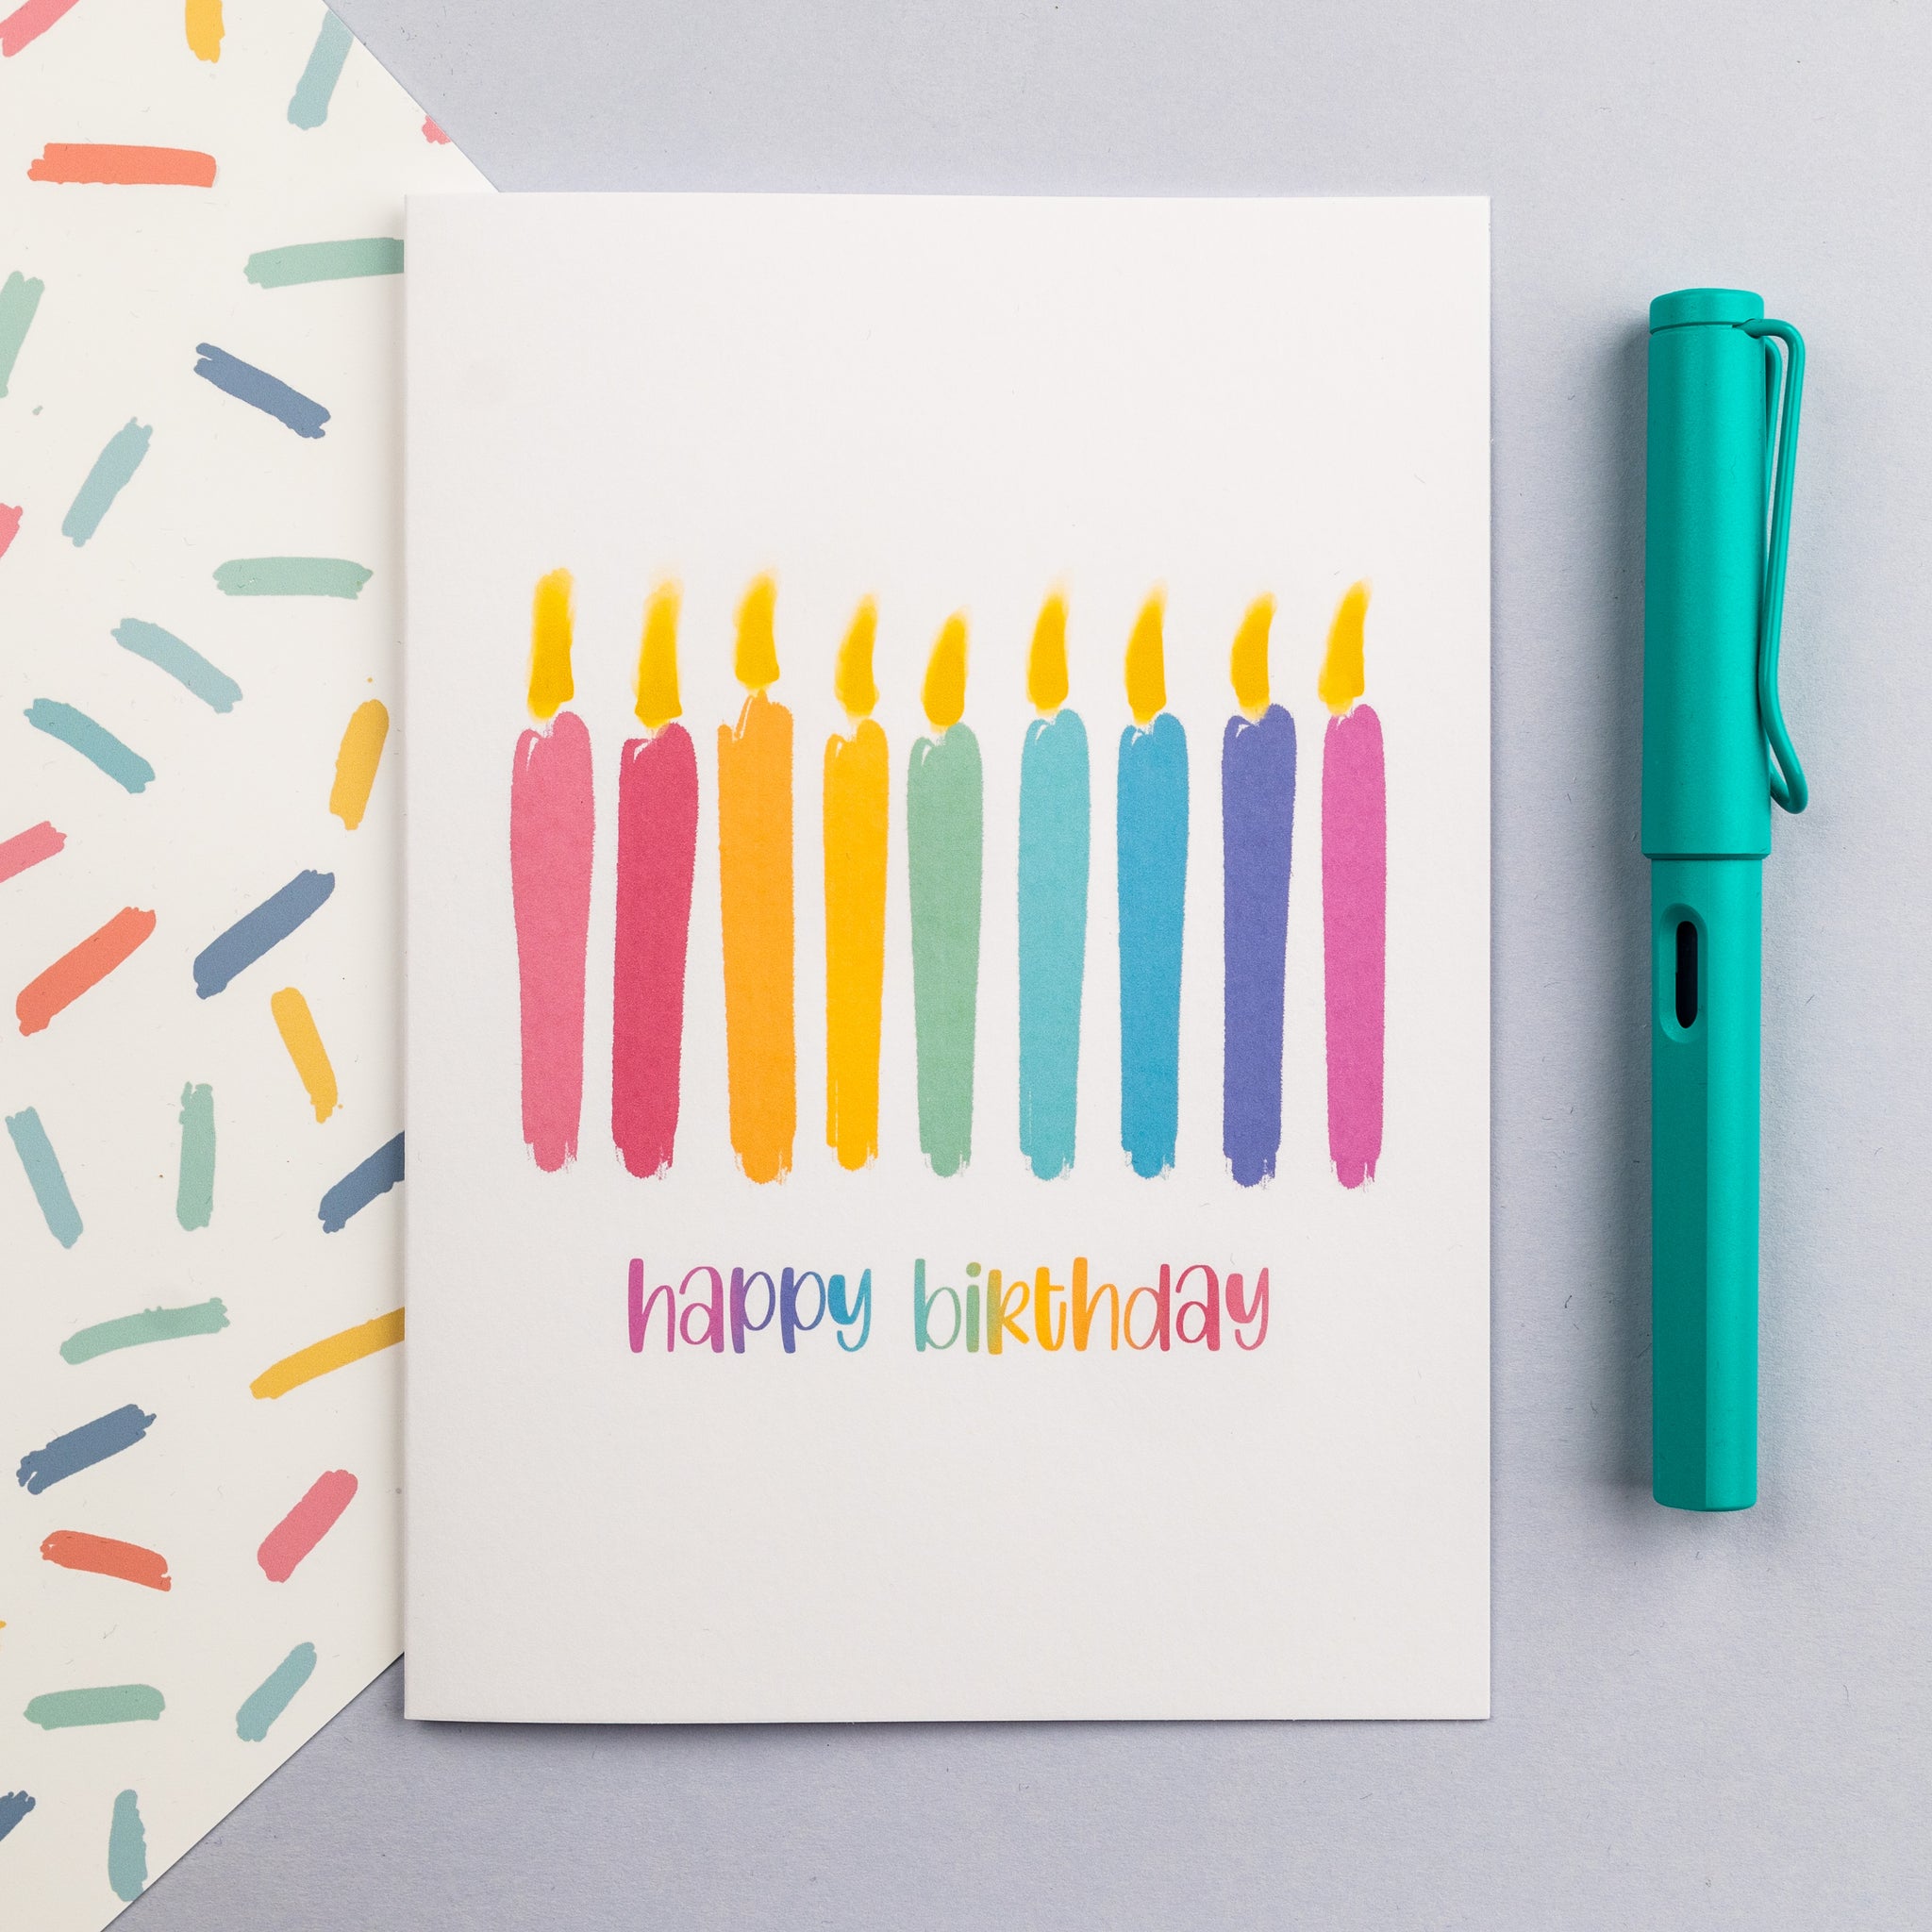 Candle Line Birthday card